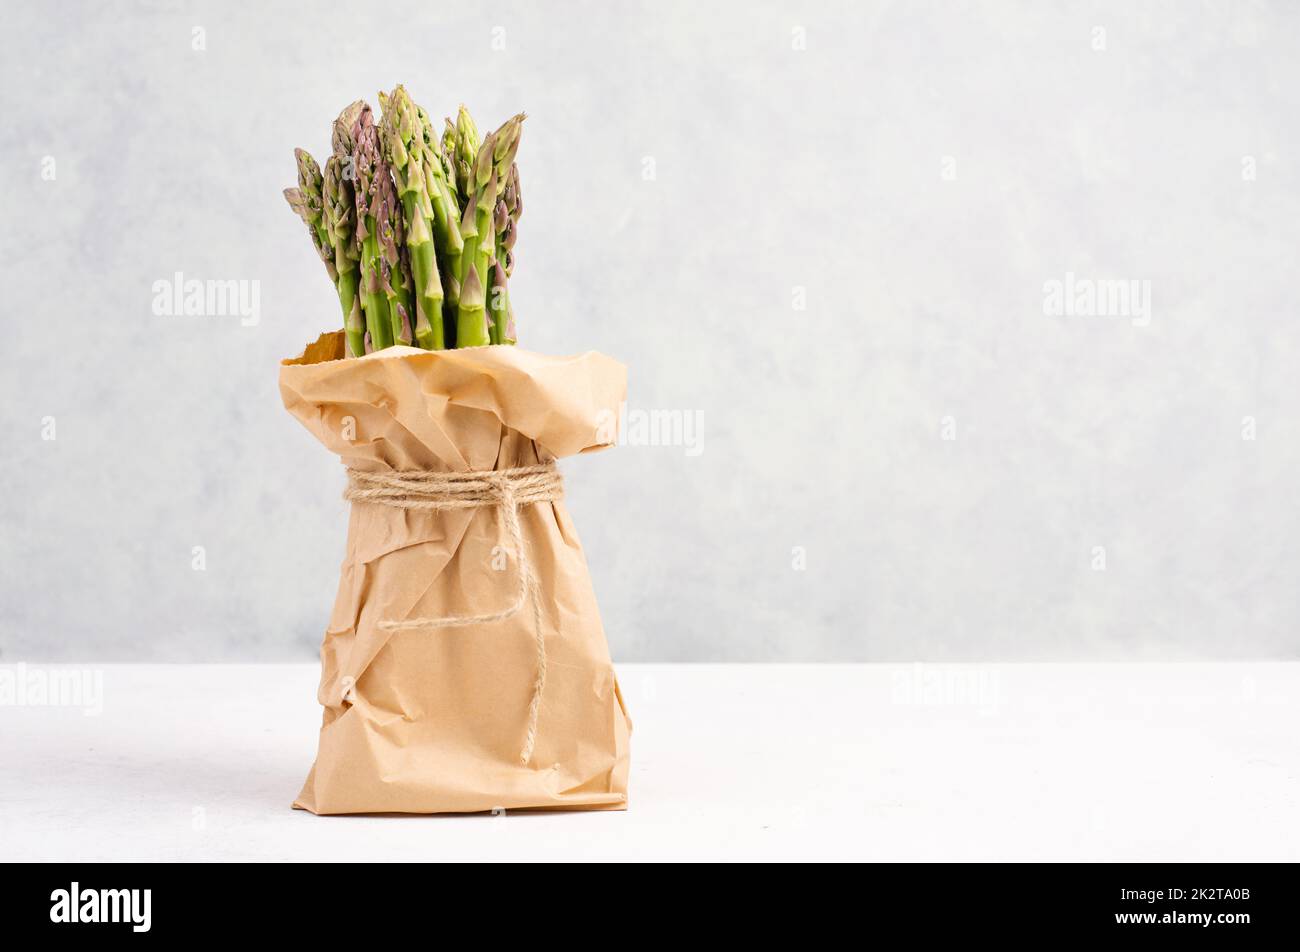 Fresh green bundle of asparagus on a white textured table, vegetables in spring, gourmet cuisine food, cooking a vegan meal Stock Photo